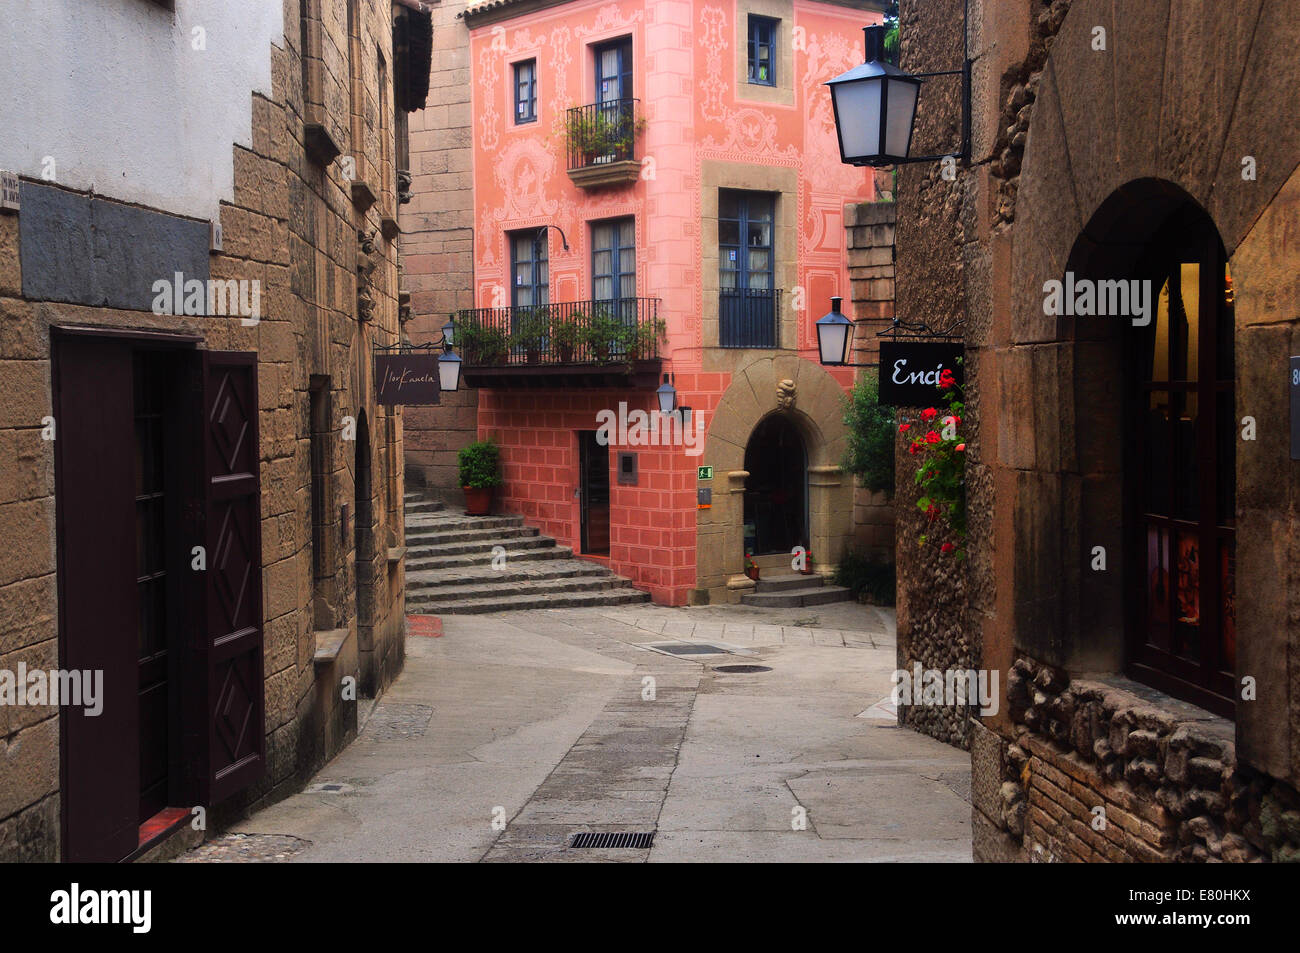 Poble Espanyol (traditional architectural complex) in Barcelona, Spain Stock Photo